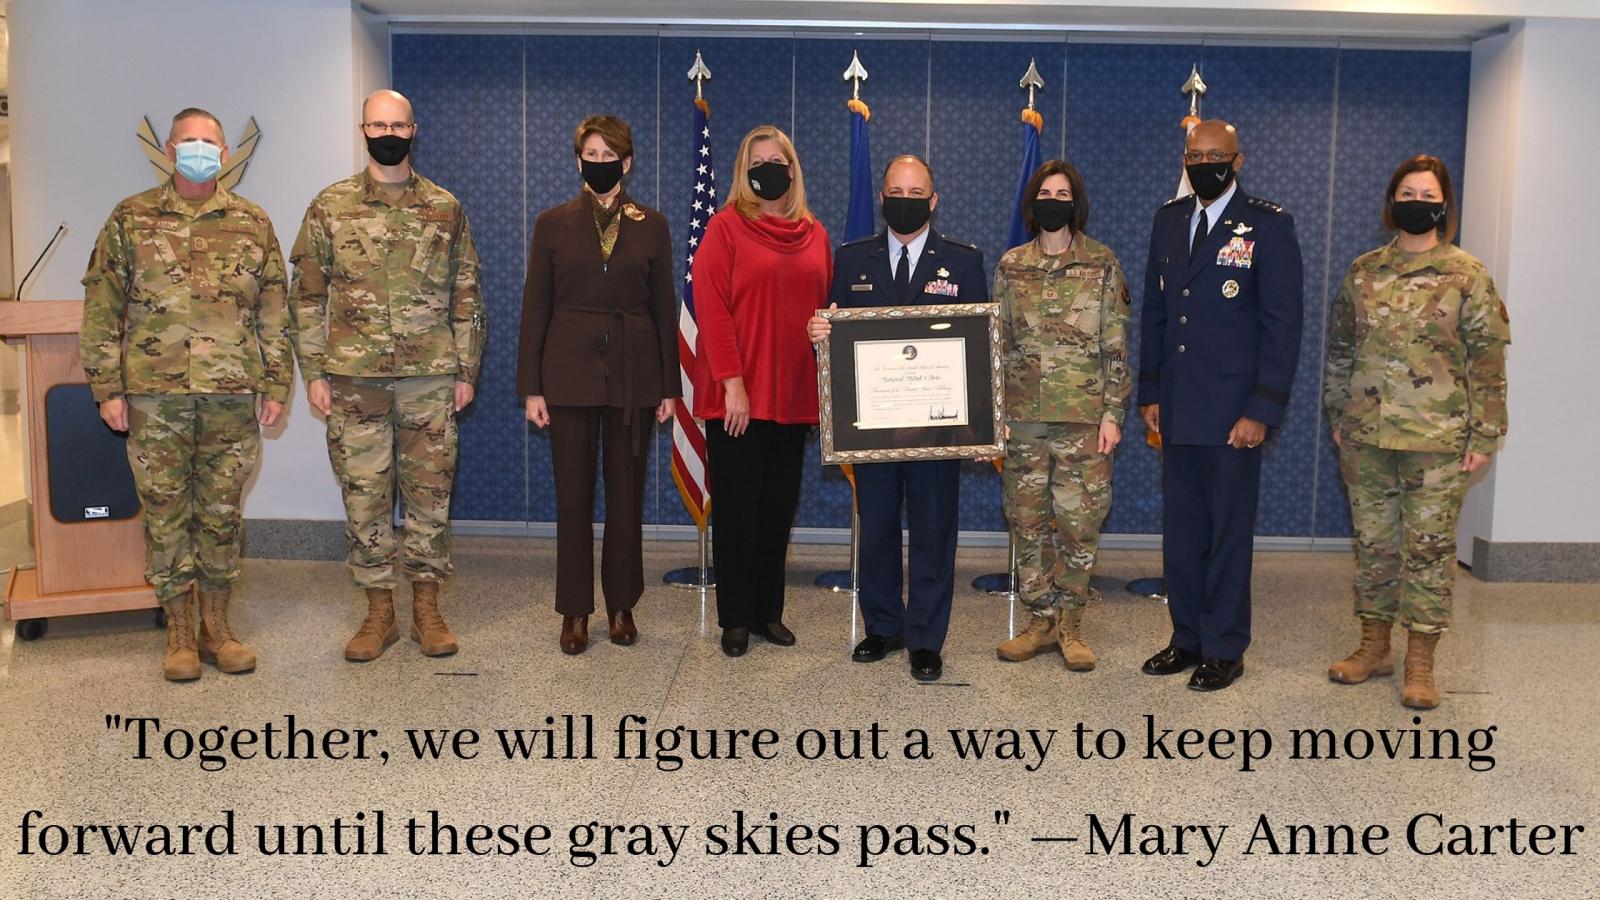 "Together, we will figure out a way forward until these gray skies pass." -Mary Anne Carter